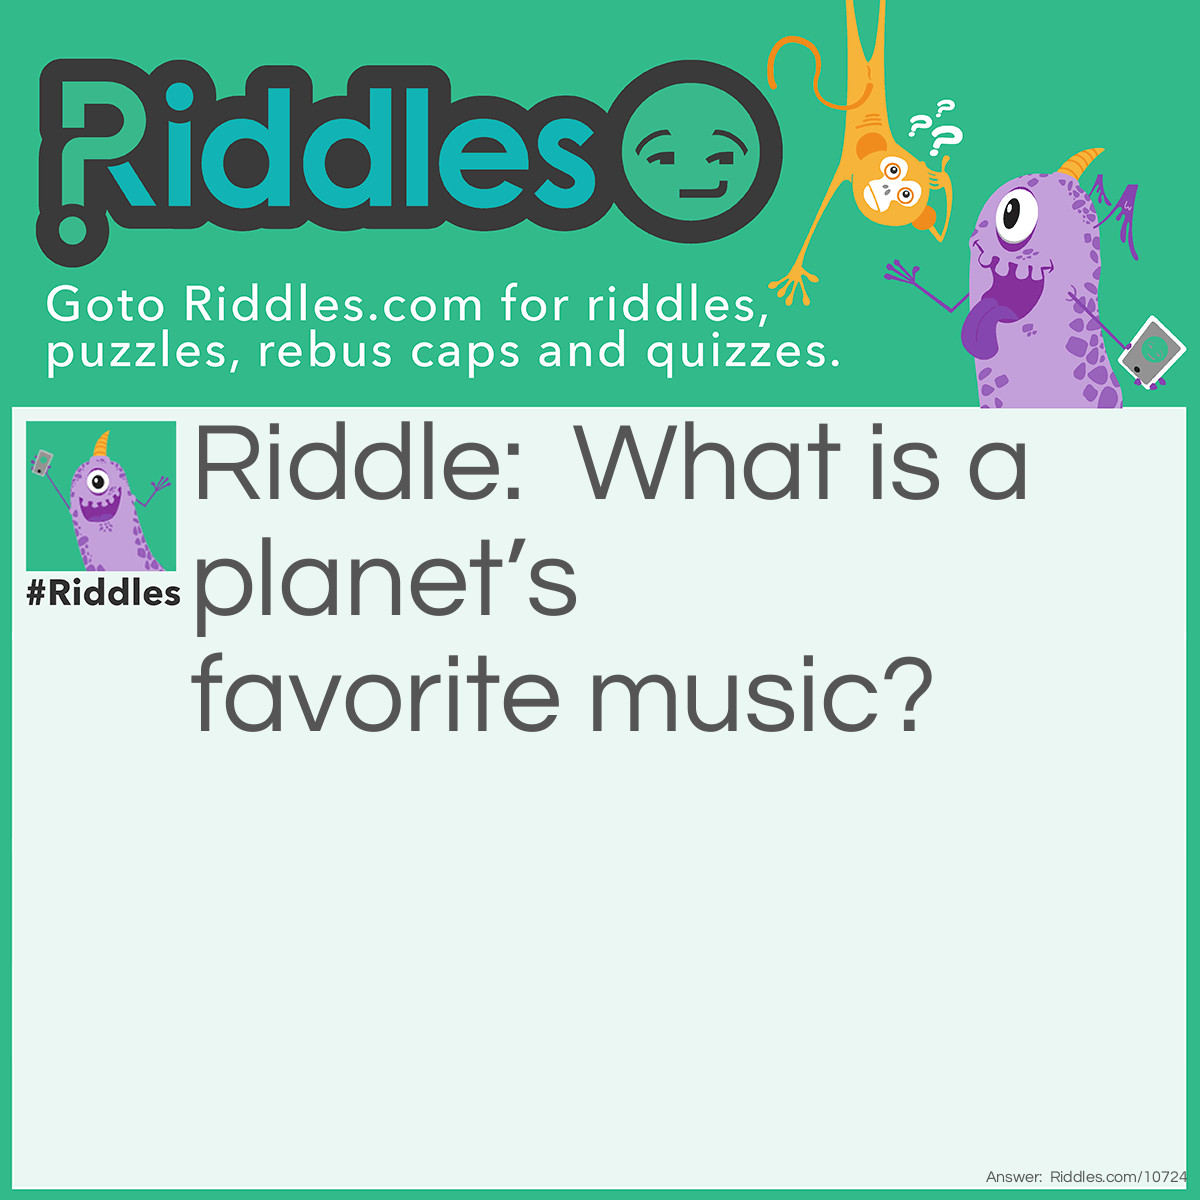 Riddle: What is a planet’s favorite music? Answer: Nep-tune.